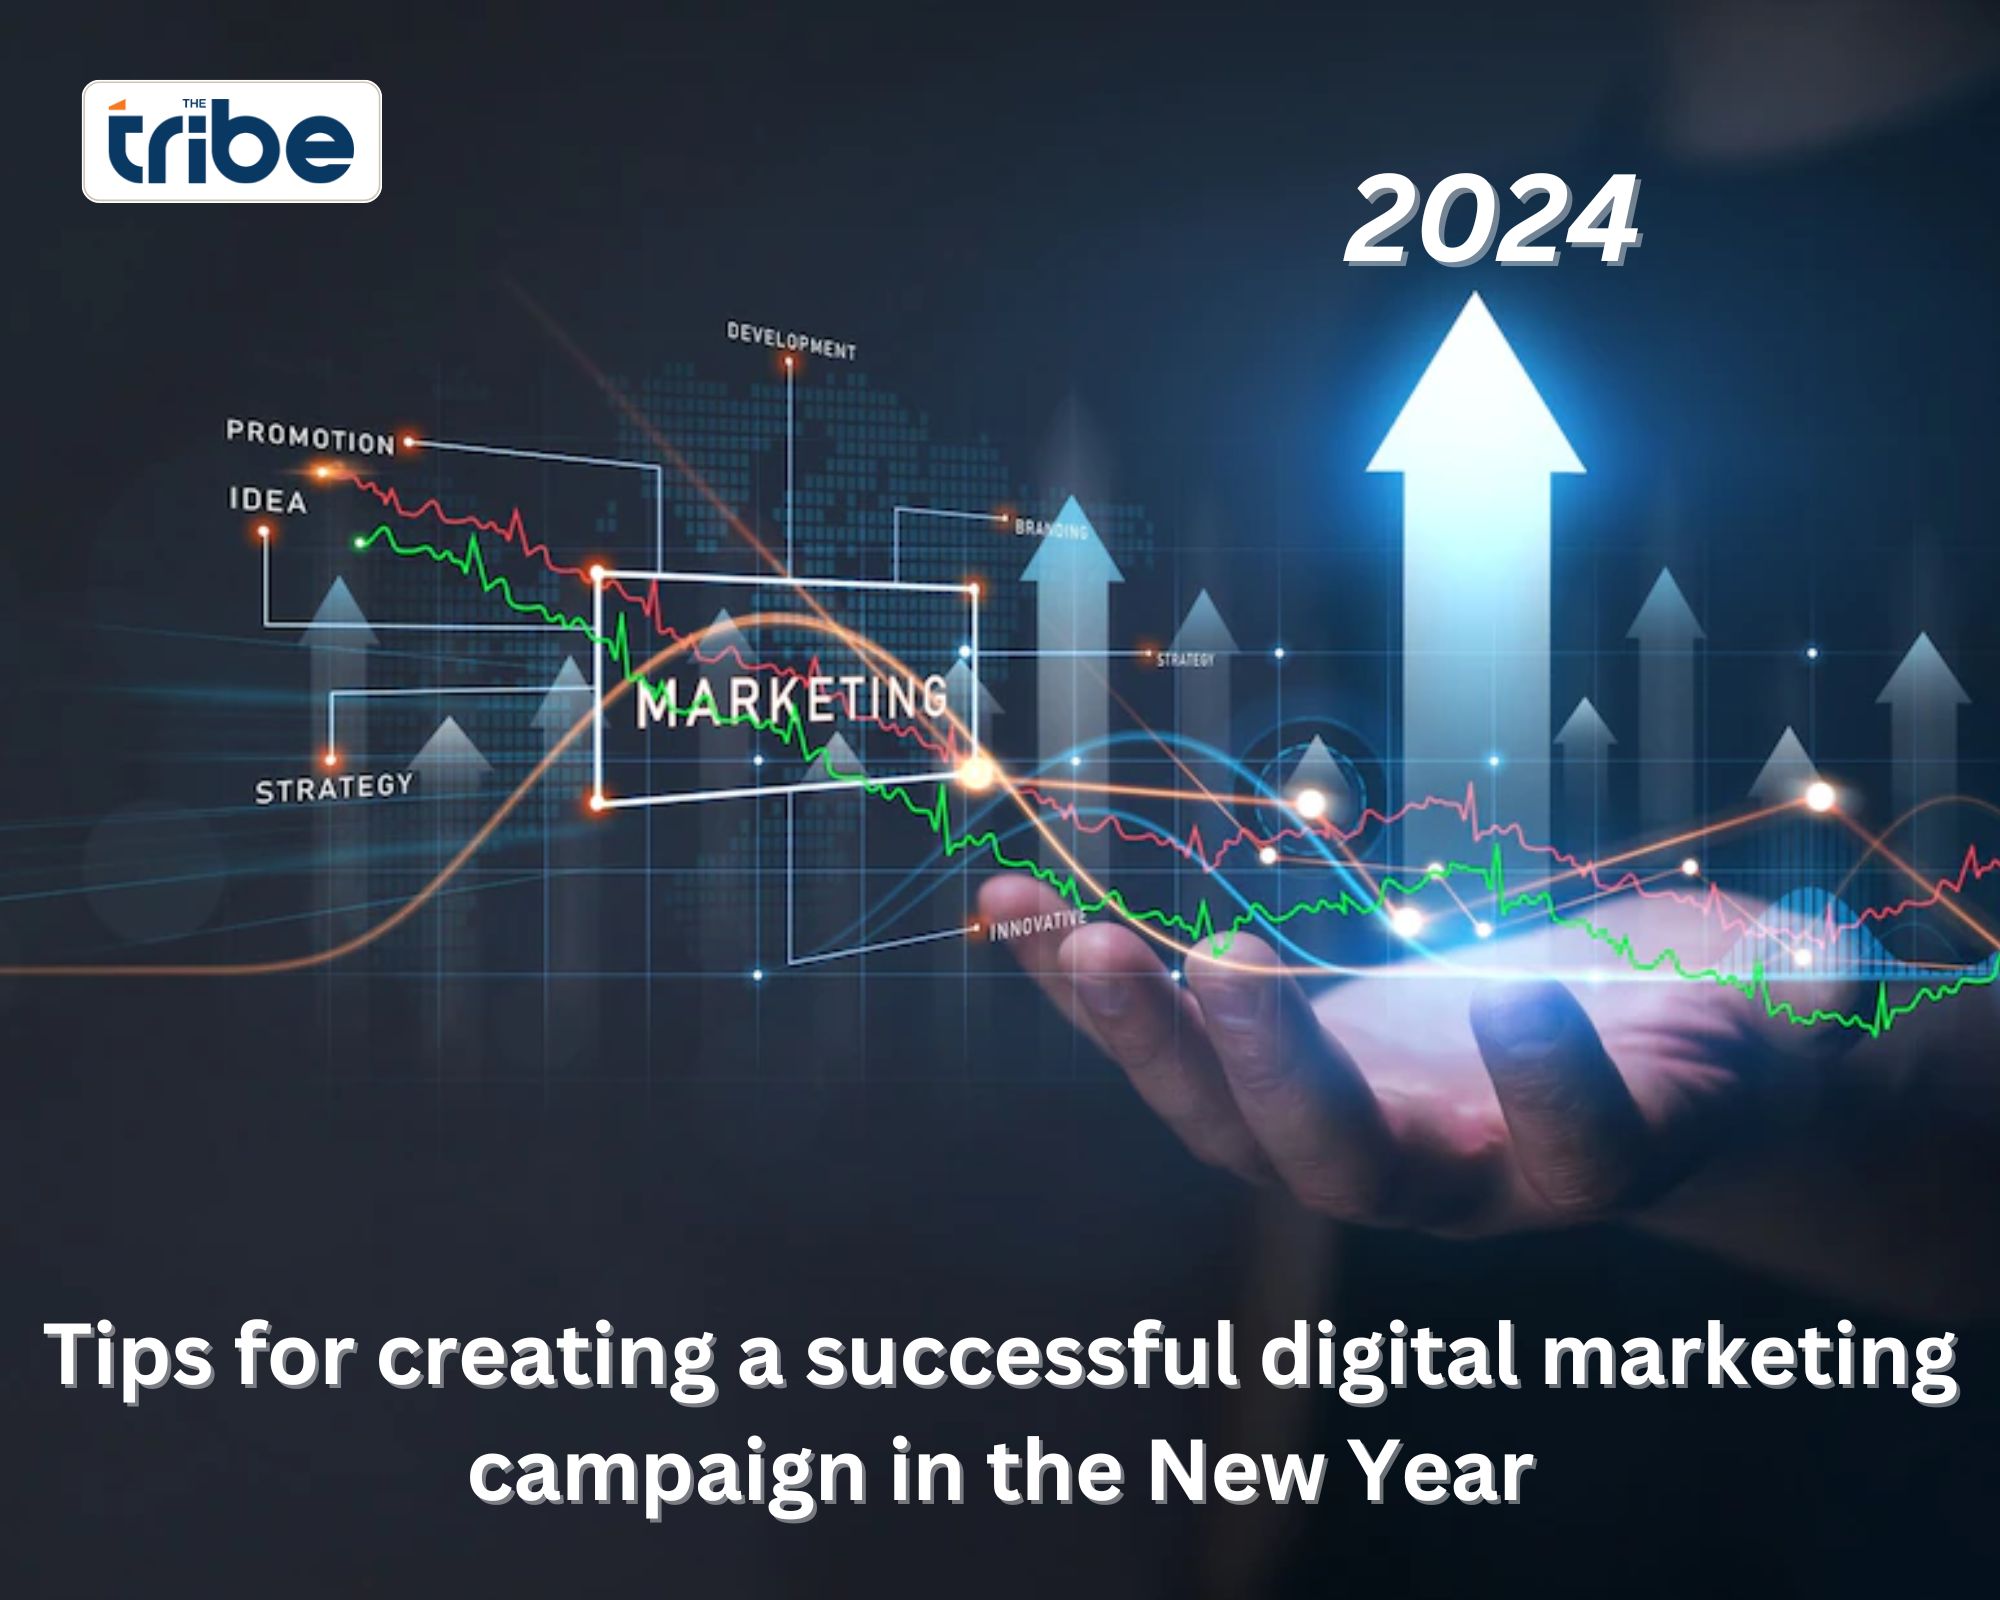 Tips for creating a successful digital marketing campaign in the New Year